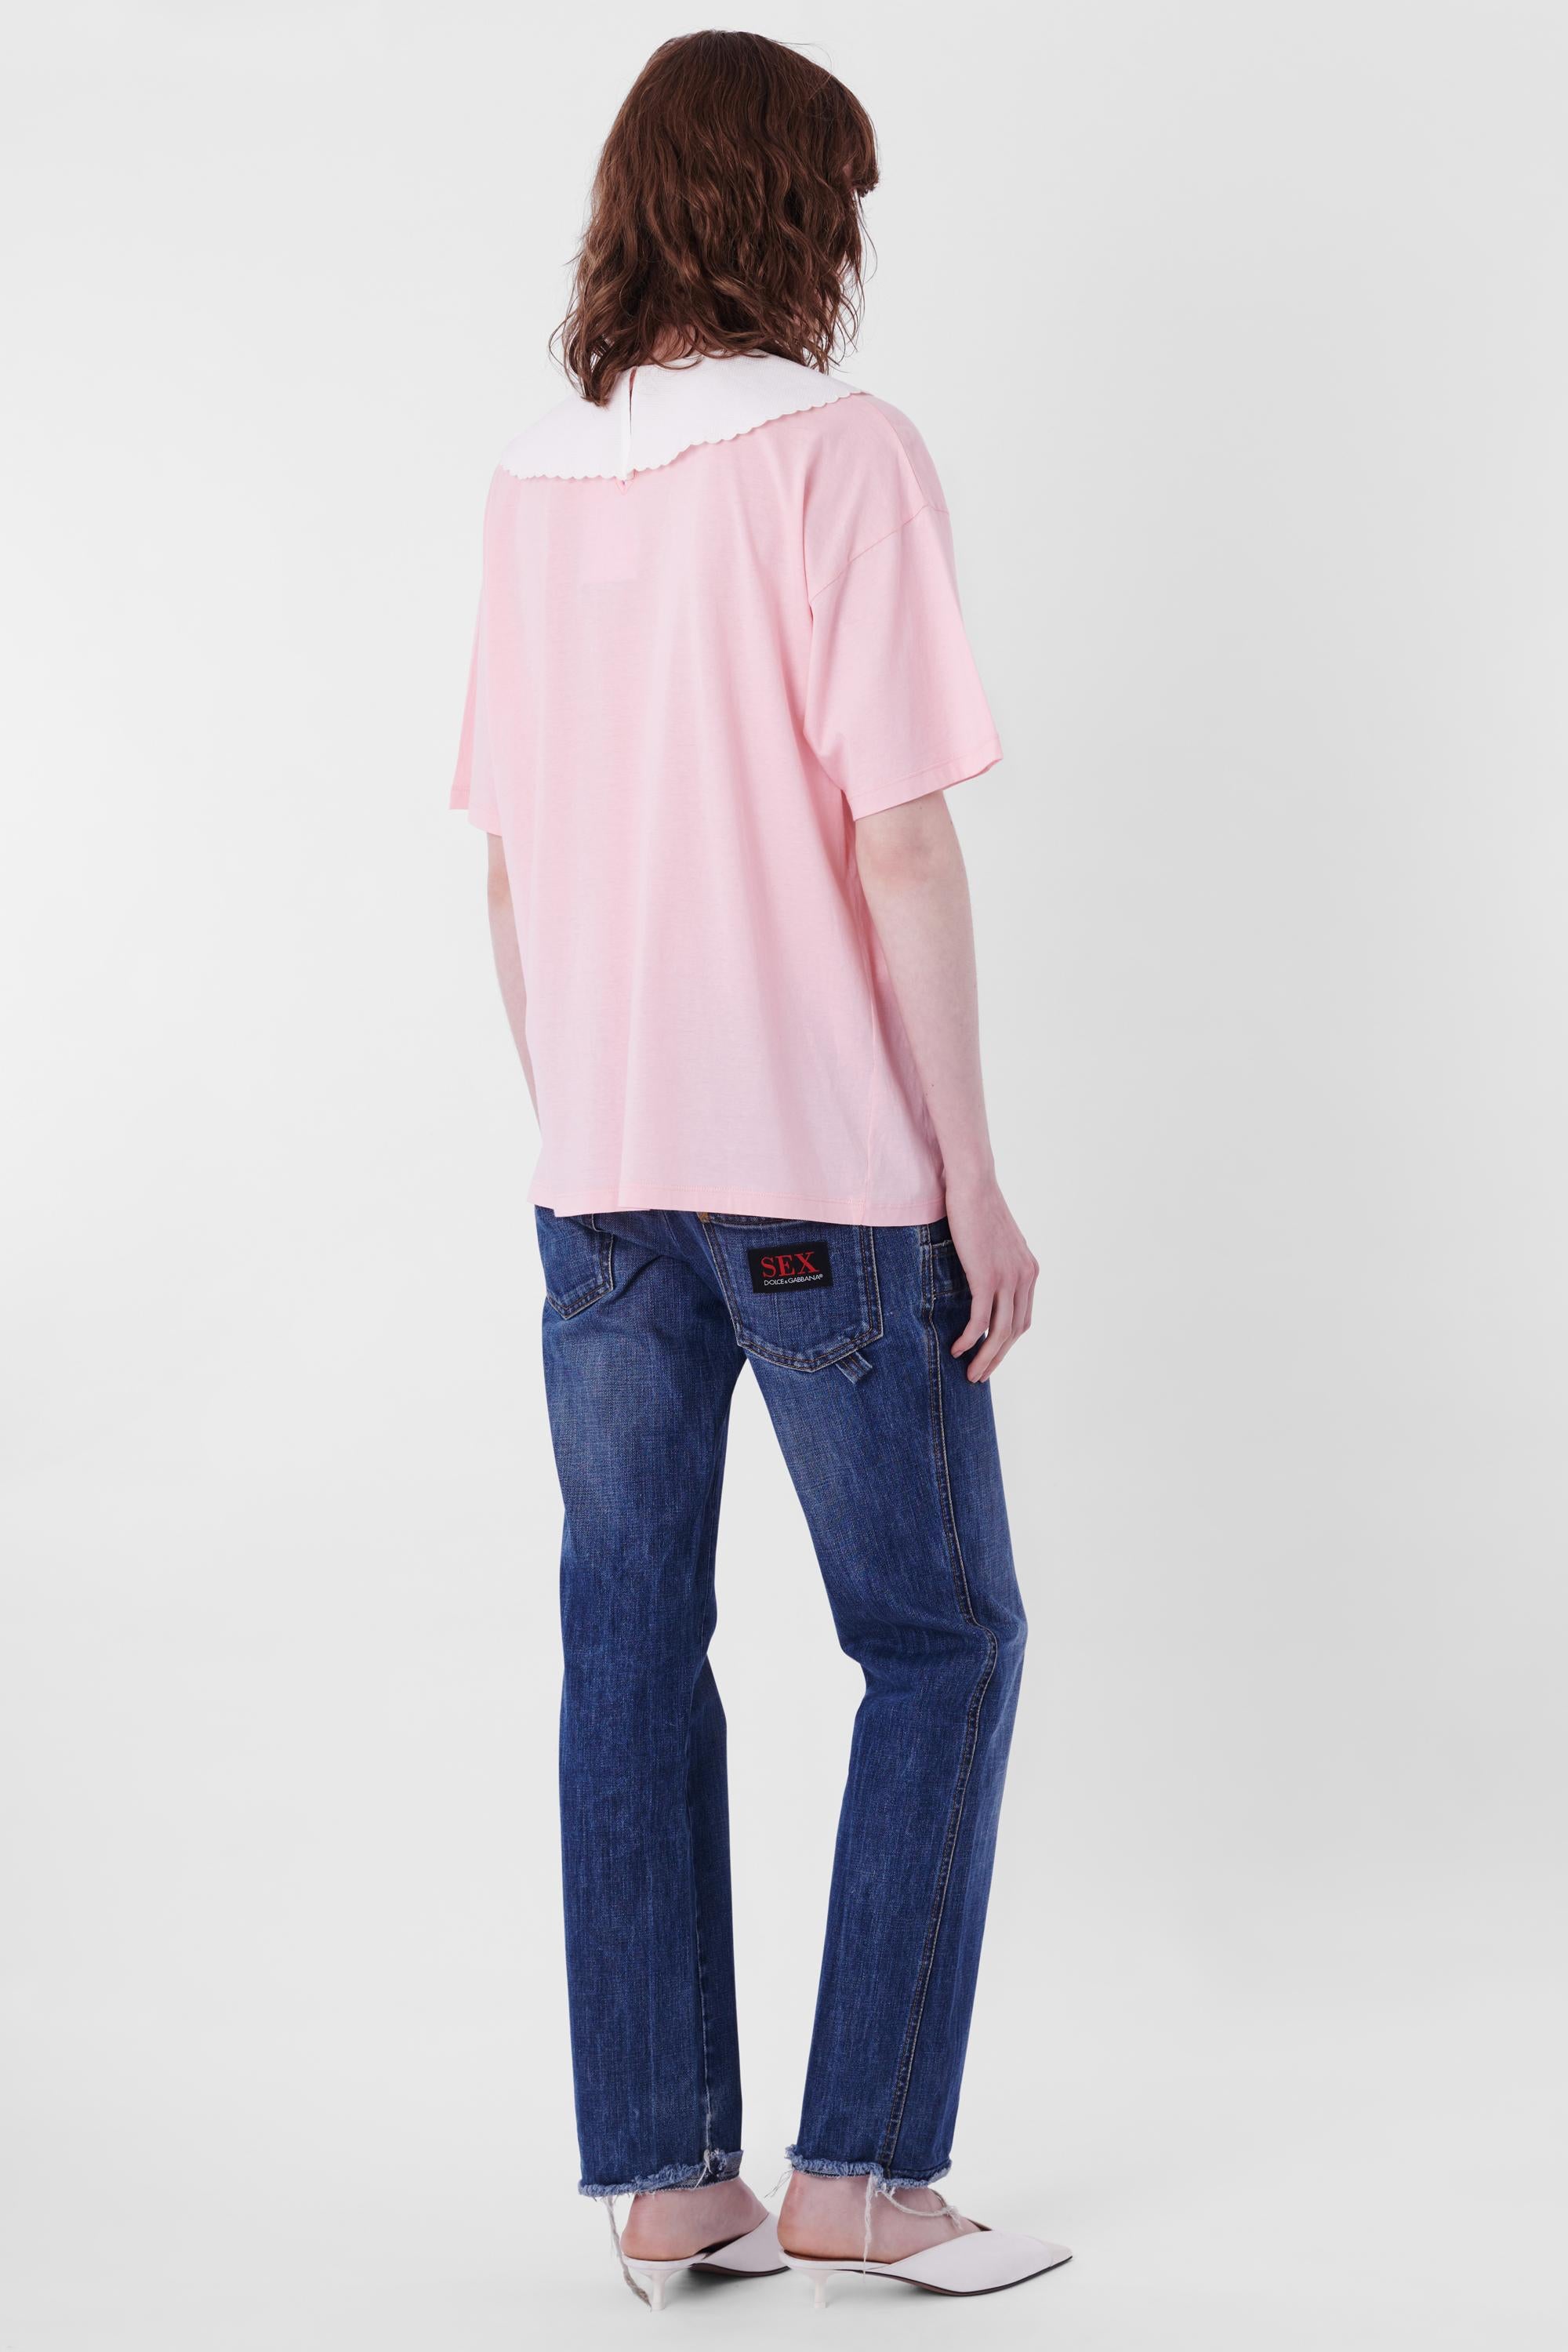 Miu Miu Pink T-Shirt With Collar In Excellent Condition In London, GB